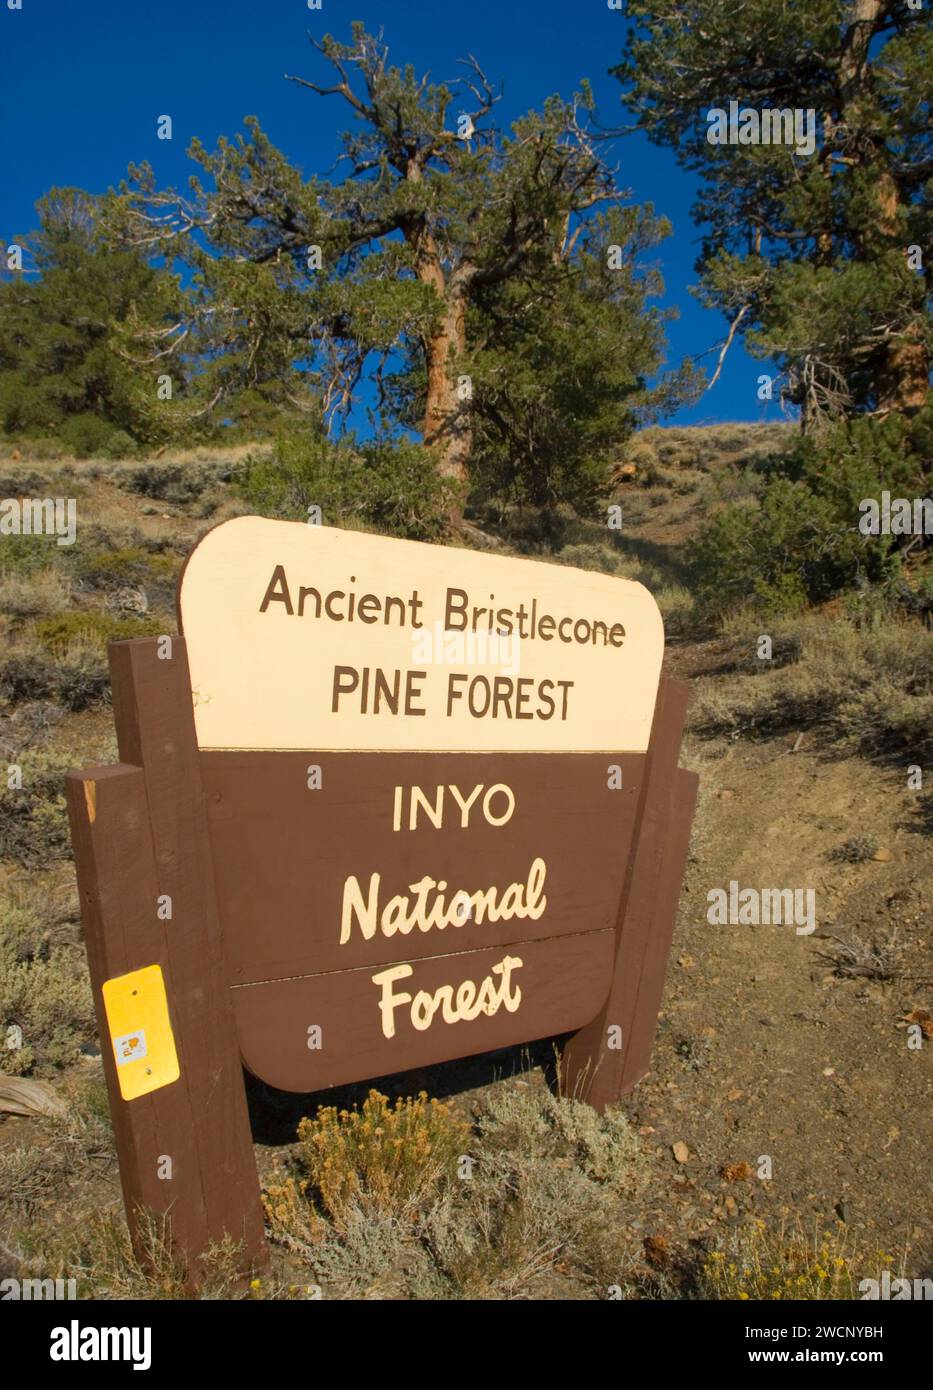 Entrance sign, Ancient Bristlecone Pine Forest, Ancient Bristlecone National Scenic Byway, Inyo National Forest, California Stock Photo